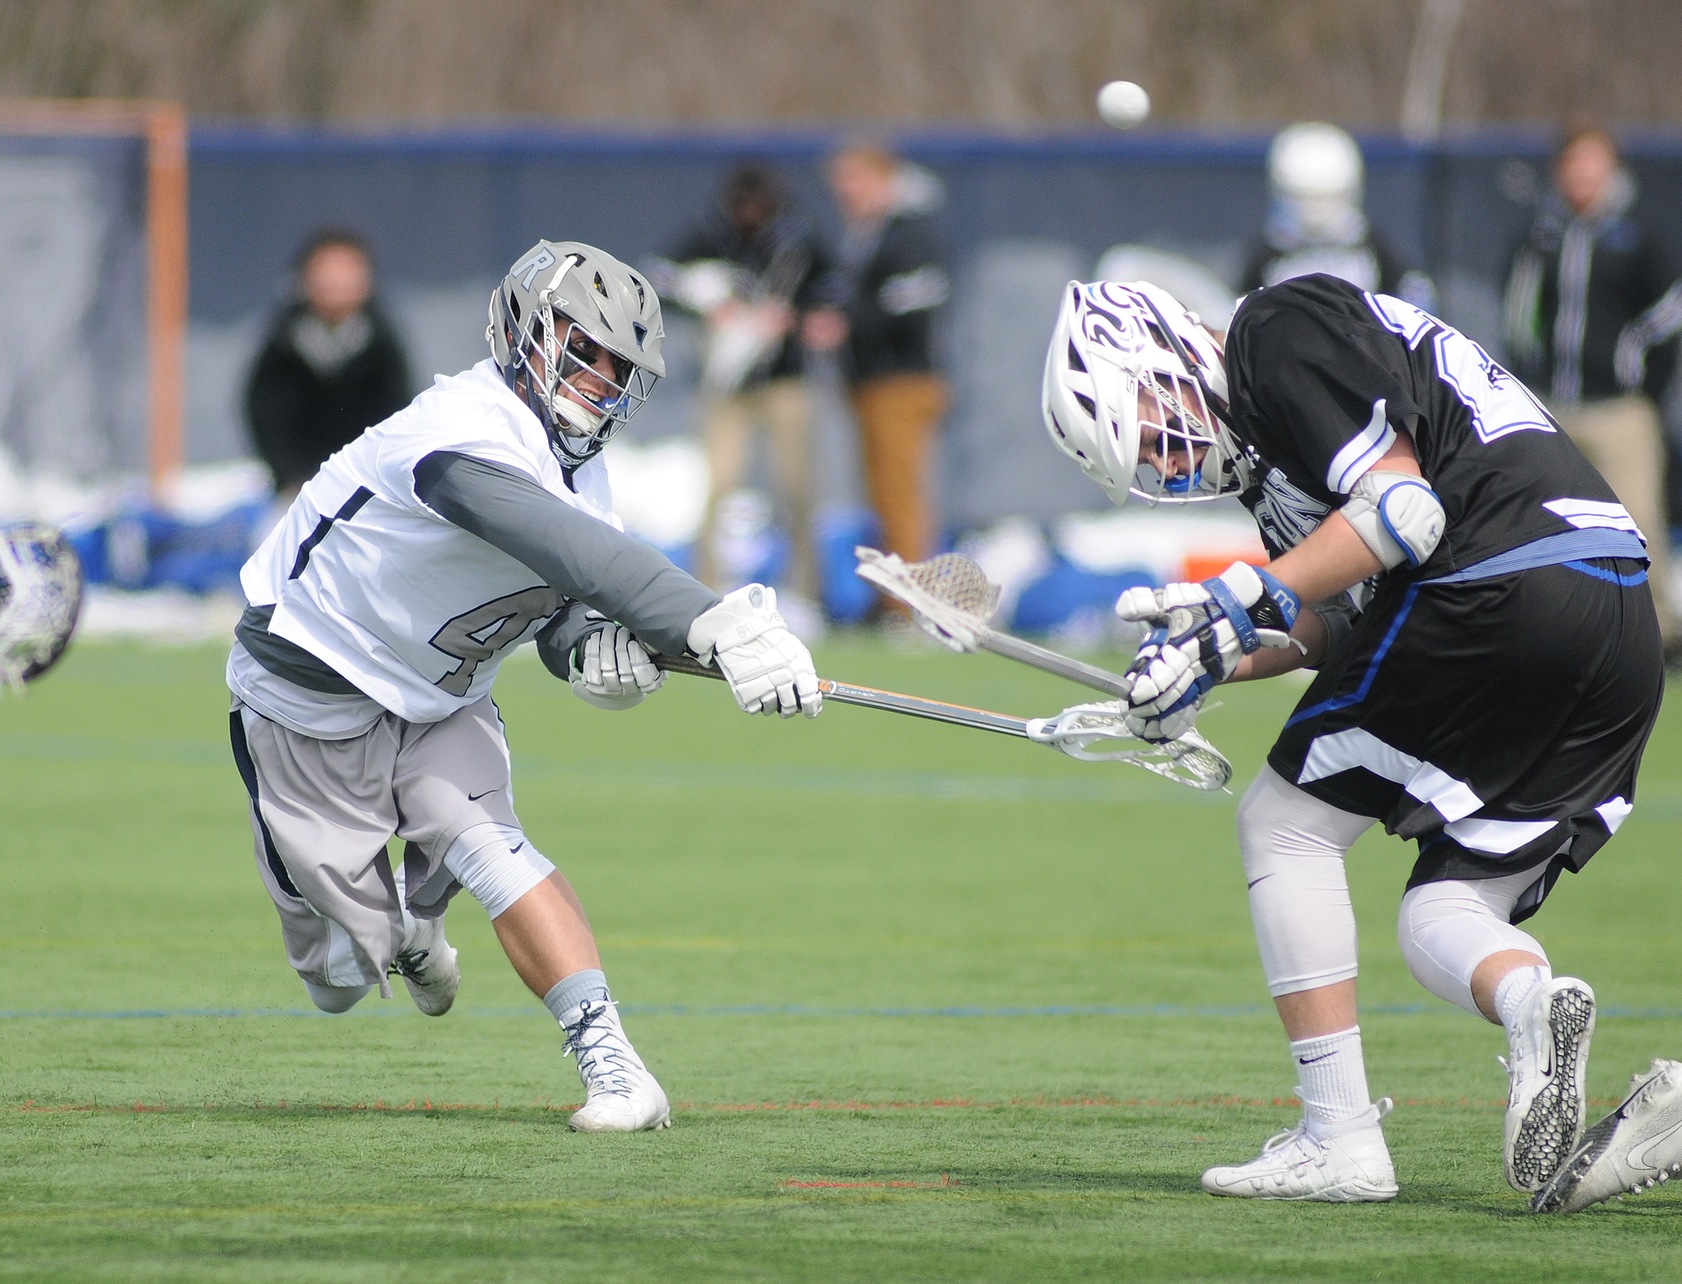 Men's Lacrosse: Raiders Collar Wildcats To Surge Into First, 16-7